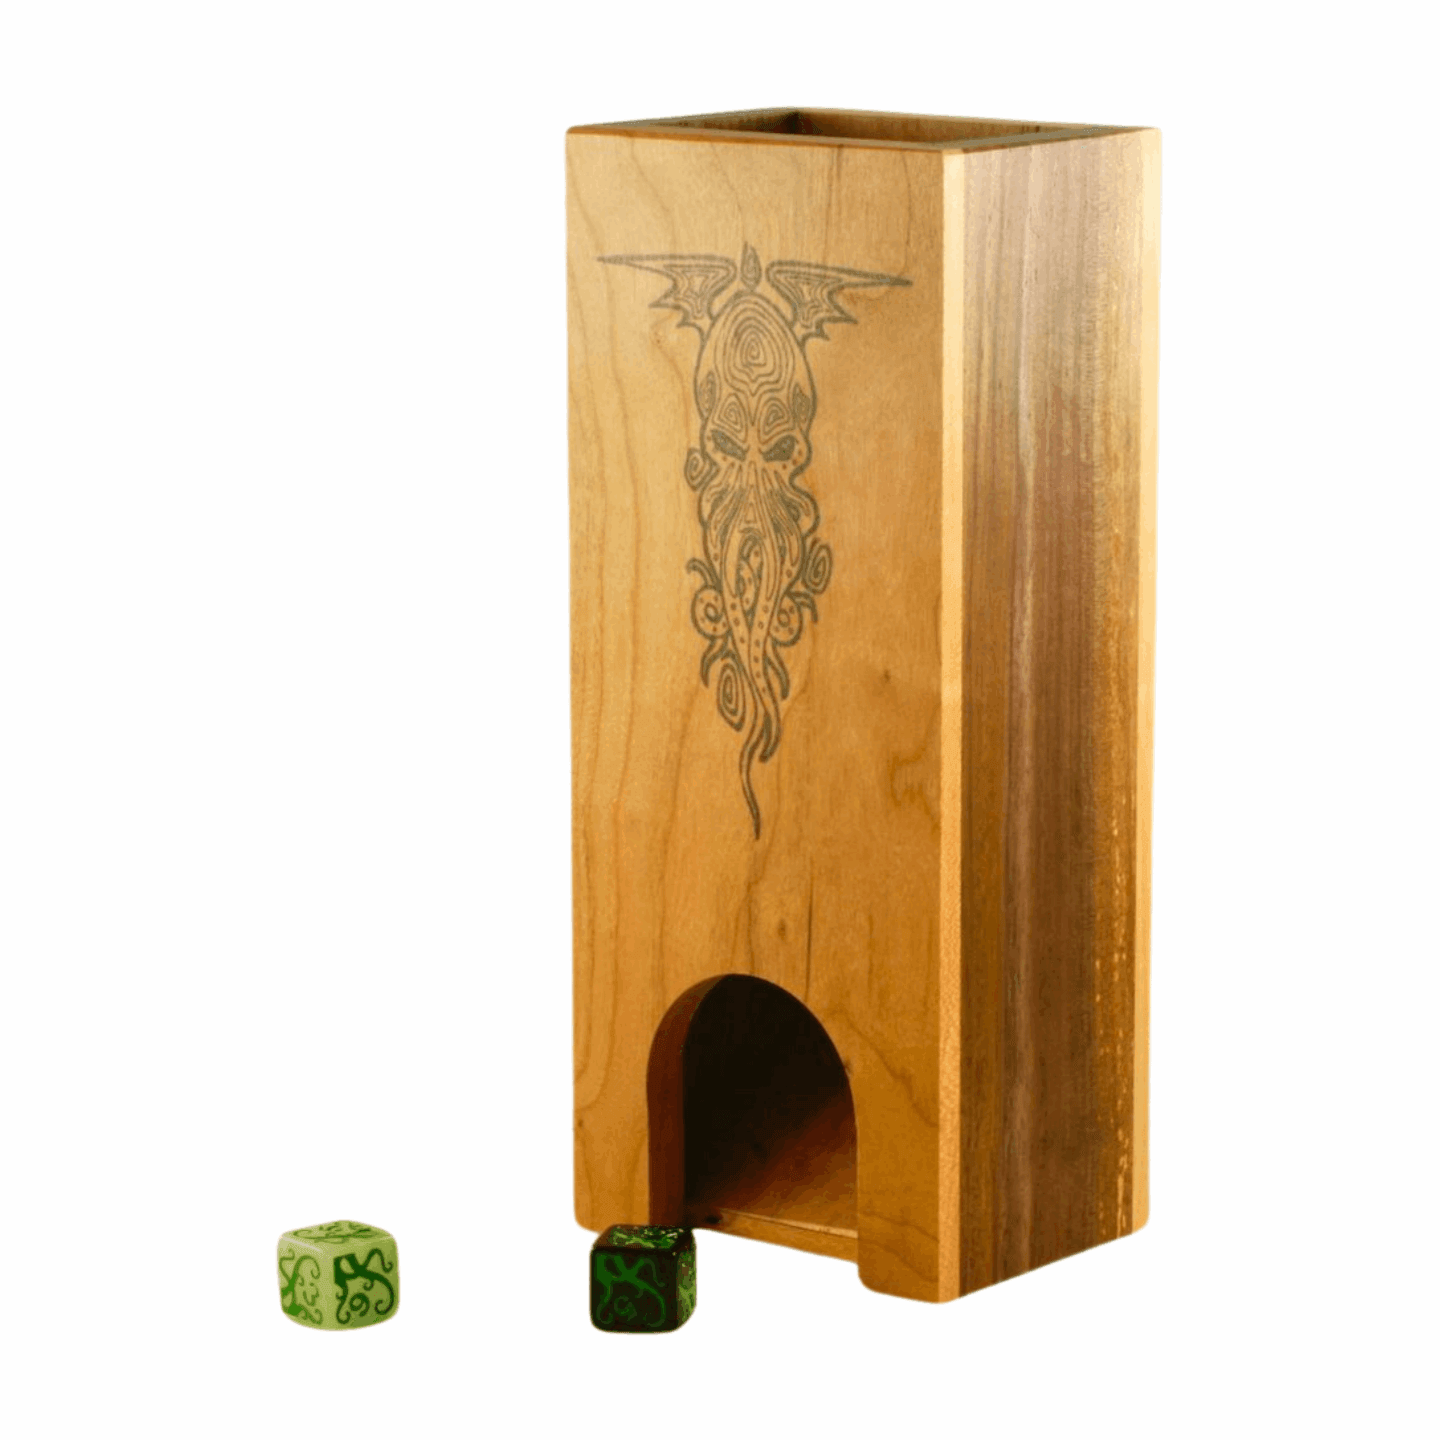 Cherry and Walnut Dice Tower with Cthulhu - Dragon Armor Games